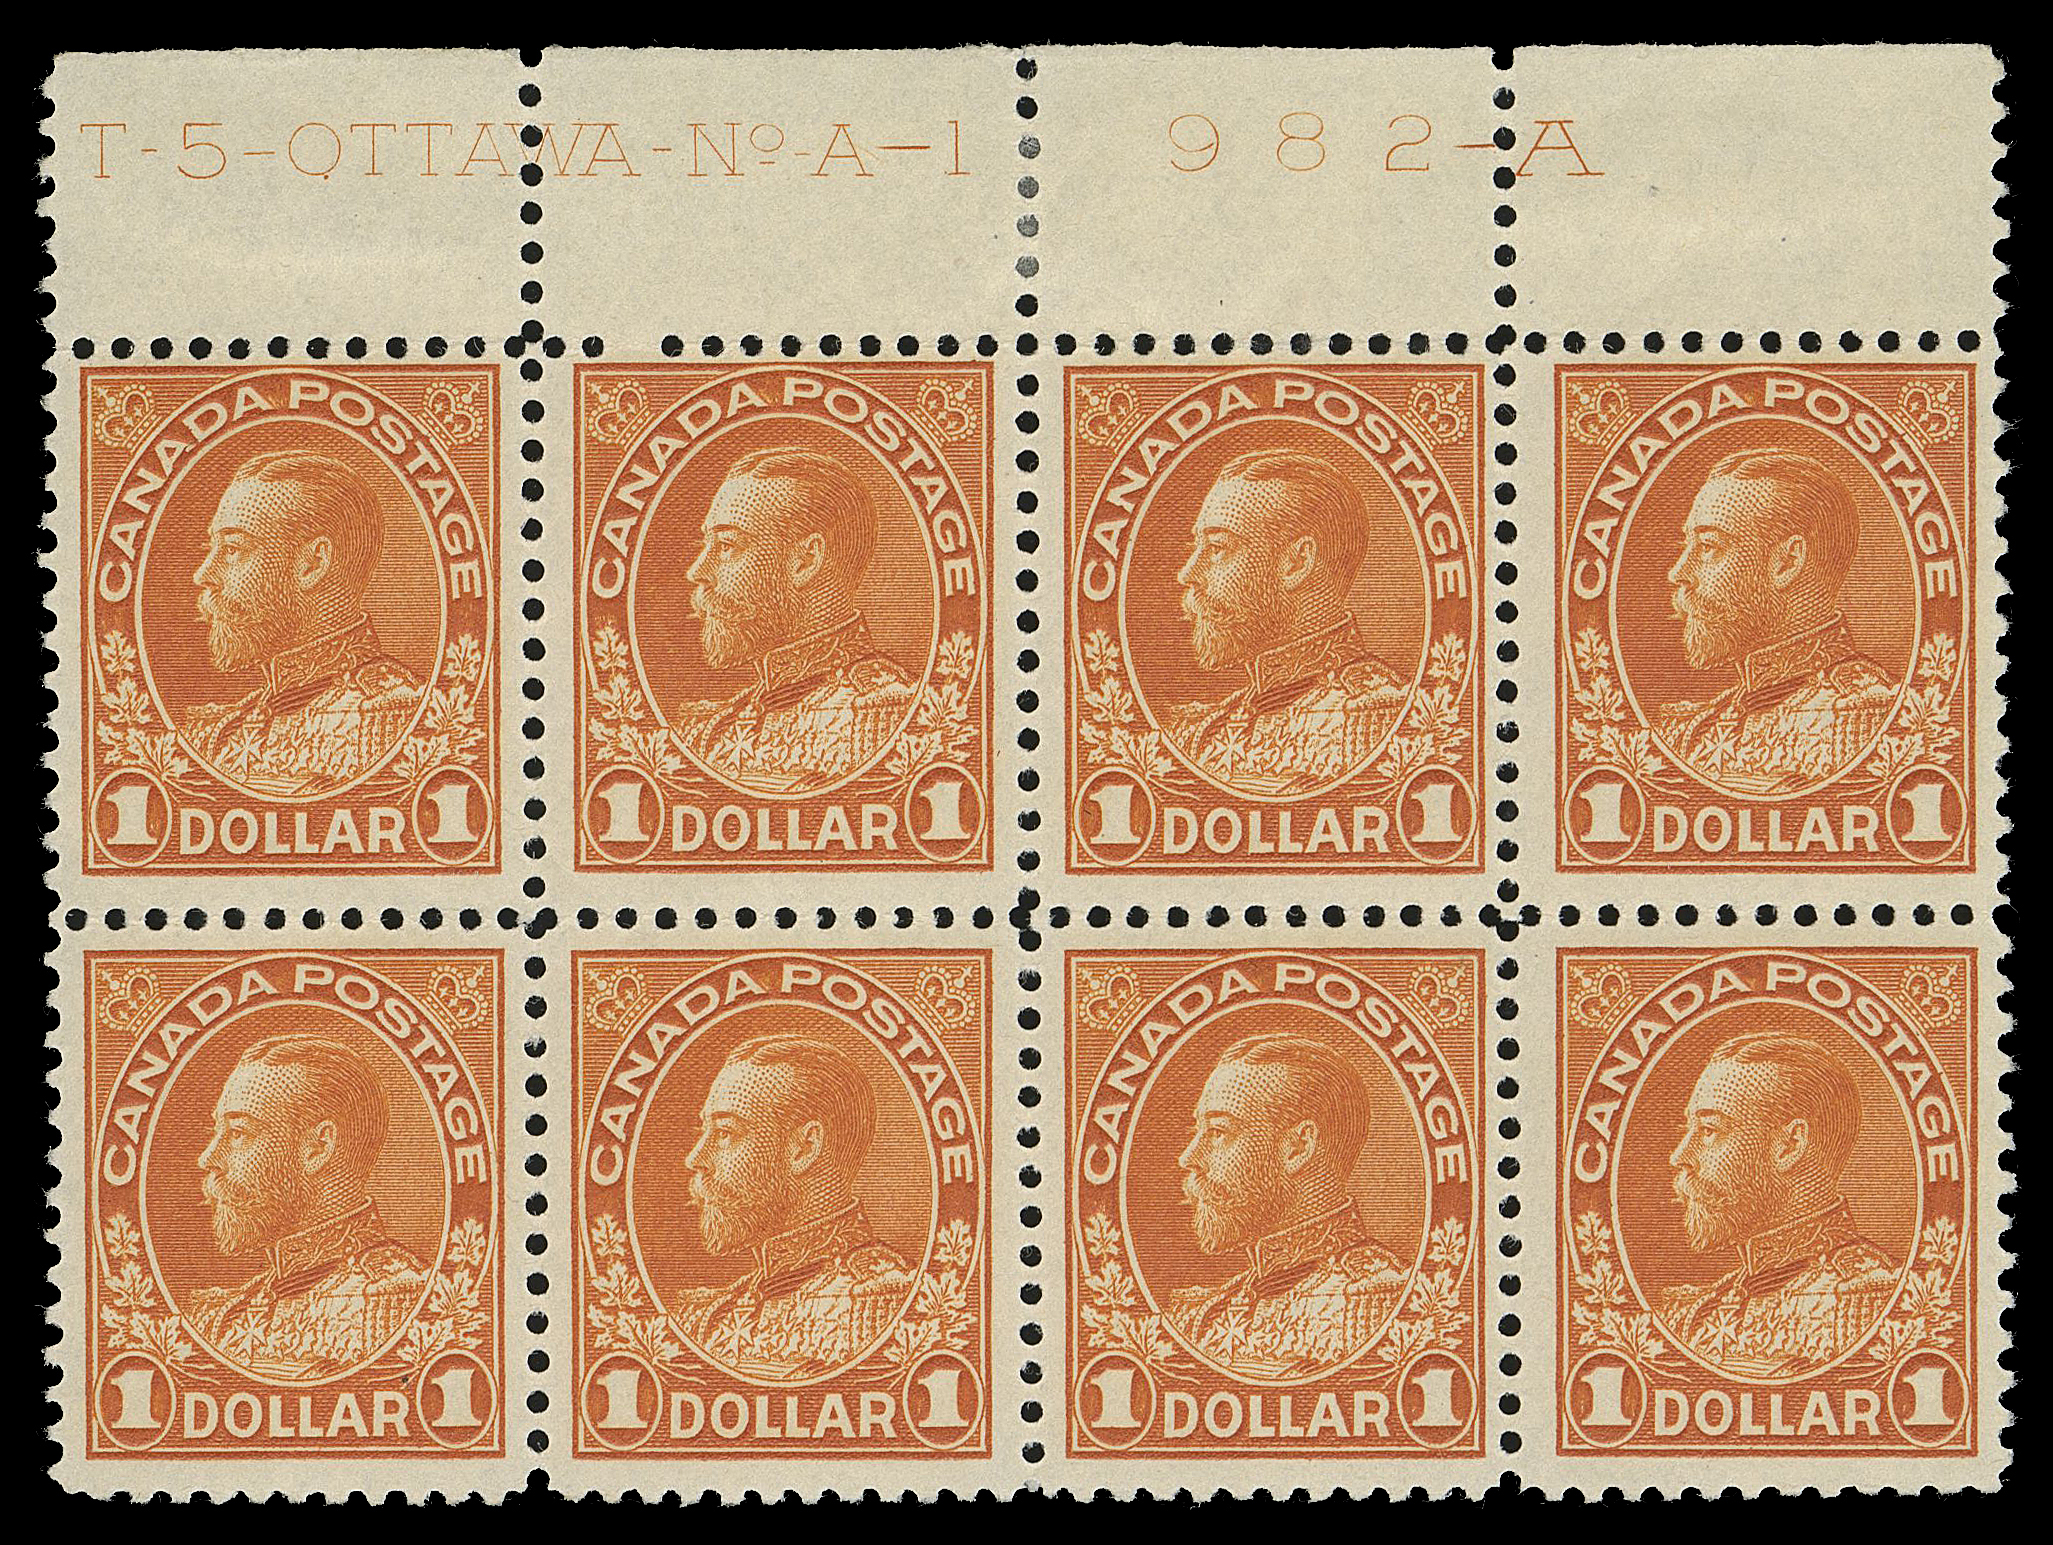 ADMIRAL STAMPS  122b,An impressive plate block of eight showing complete Plate 1 imprint, the distinctive wet printing in the deeper shade, hinged in selvedge only, all eight stamps are NH. A rarely seen plate block especially desirable showing the full imprint, F-VF (Unitrade cat. $8,000)

Plate blocks of wet printings are considerably scarcer, with clearer and sharper imprints than those of the dry printings.

Provenance: Abe Charkow, Part 2, Eastern Auctions Ltd., December 1995; Lot 585